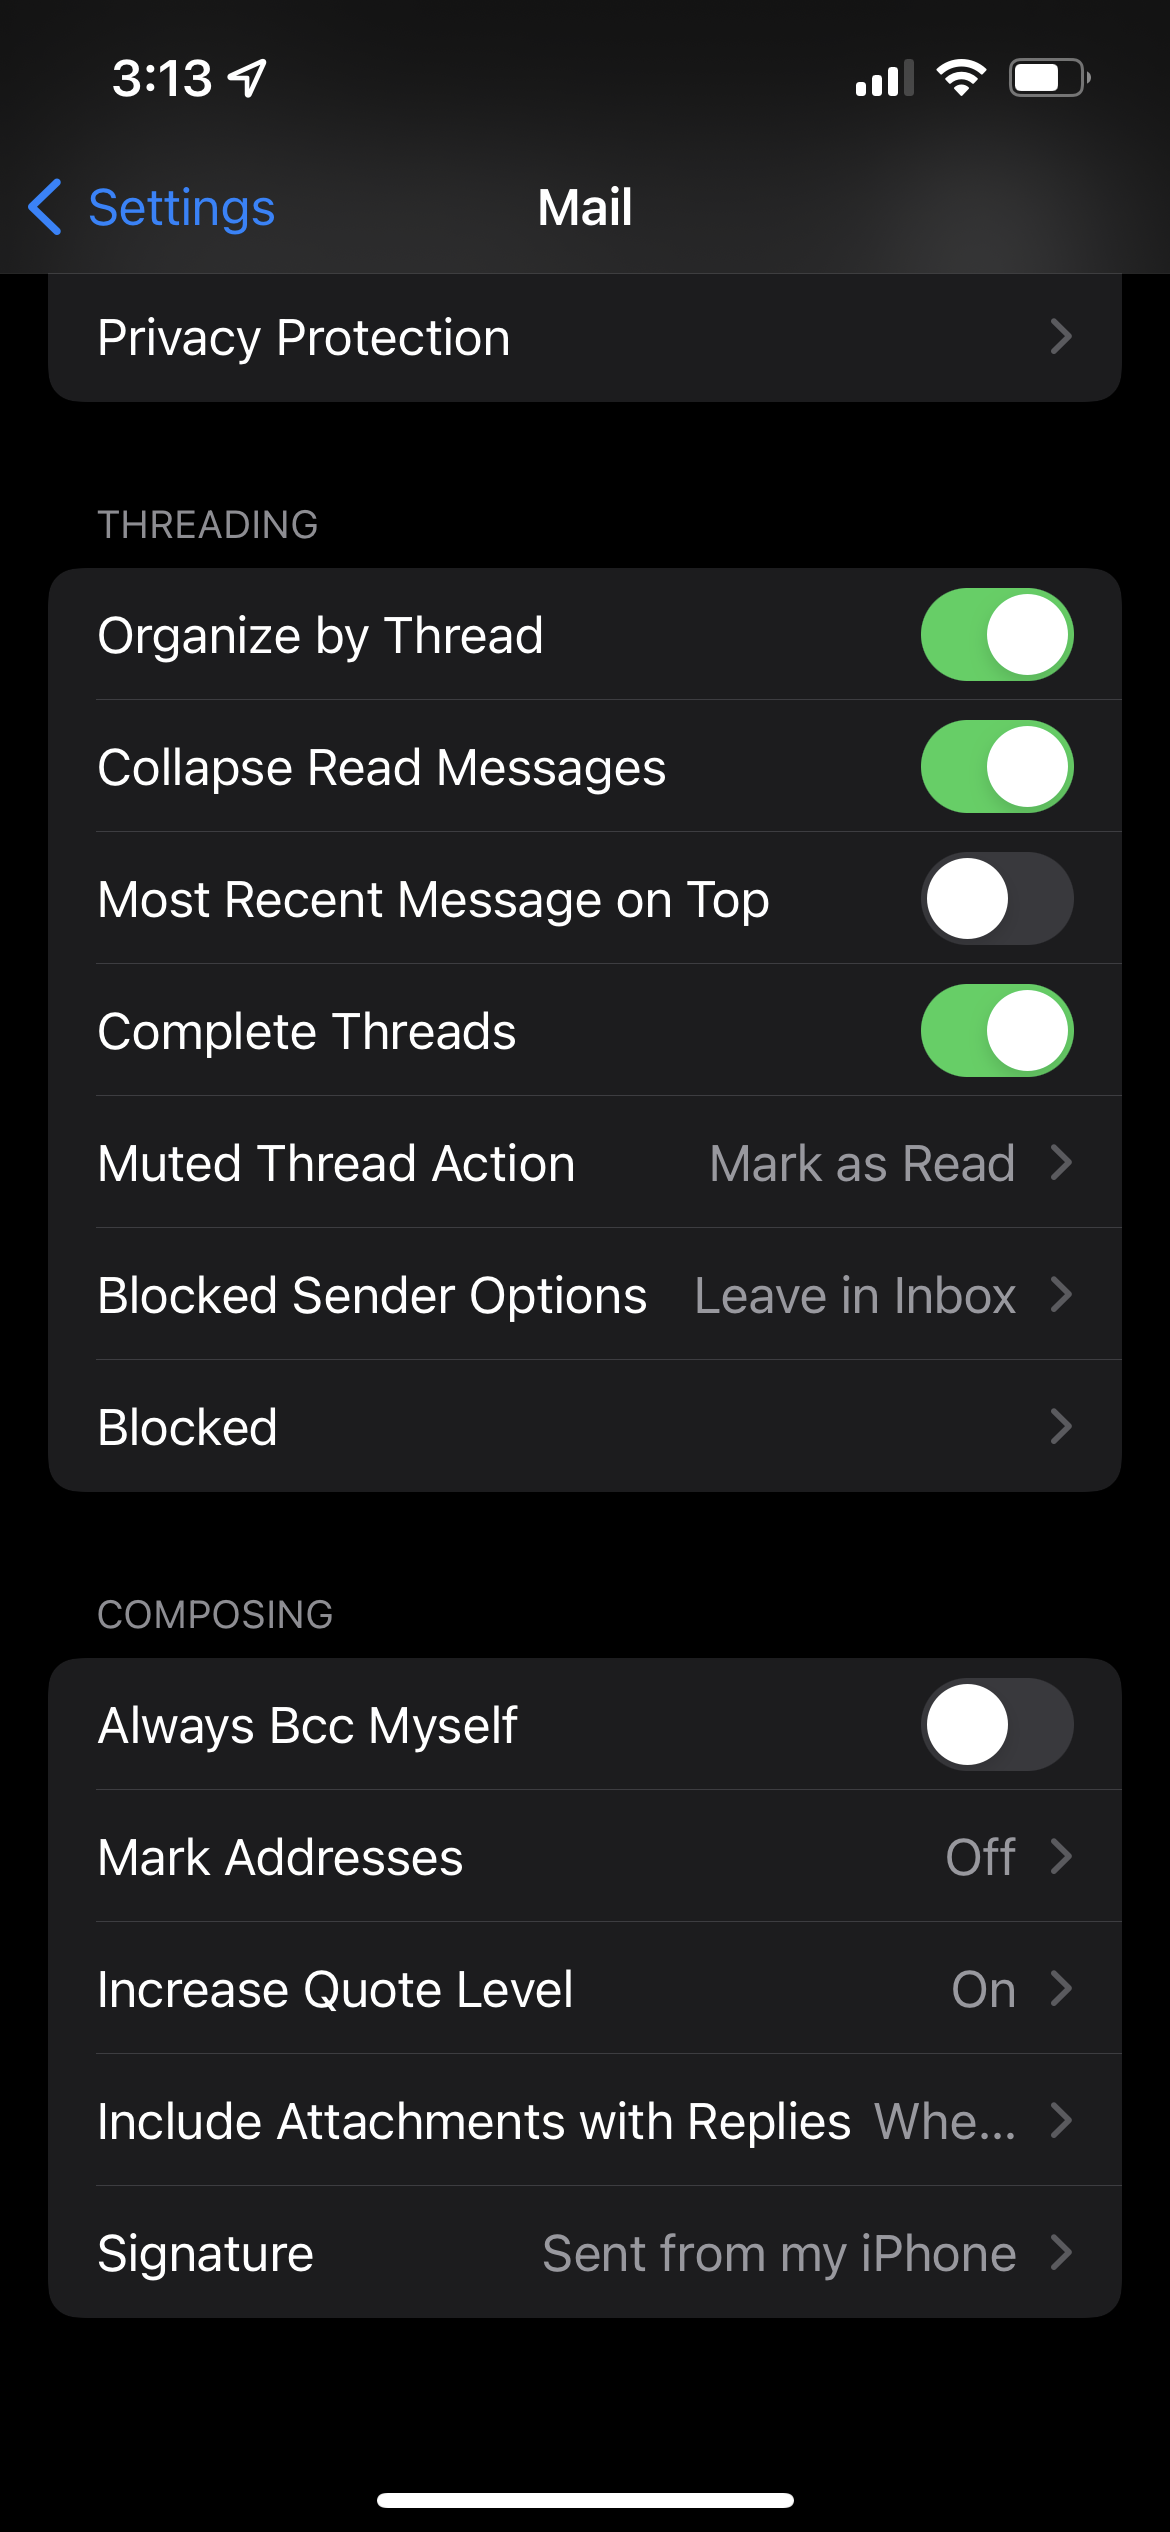 Mail settings in iOS 15